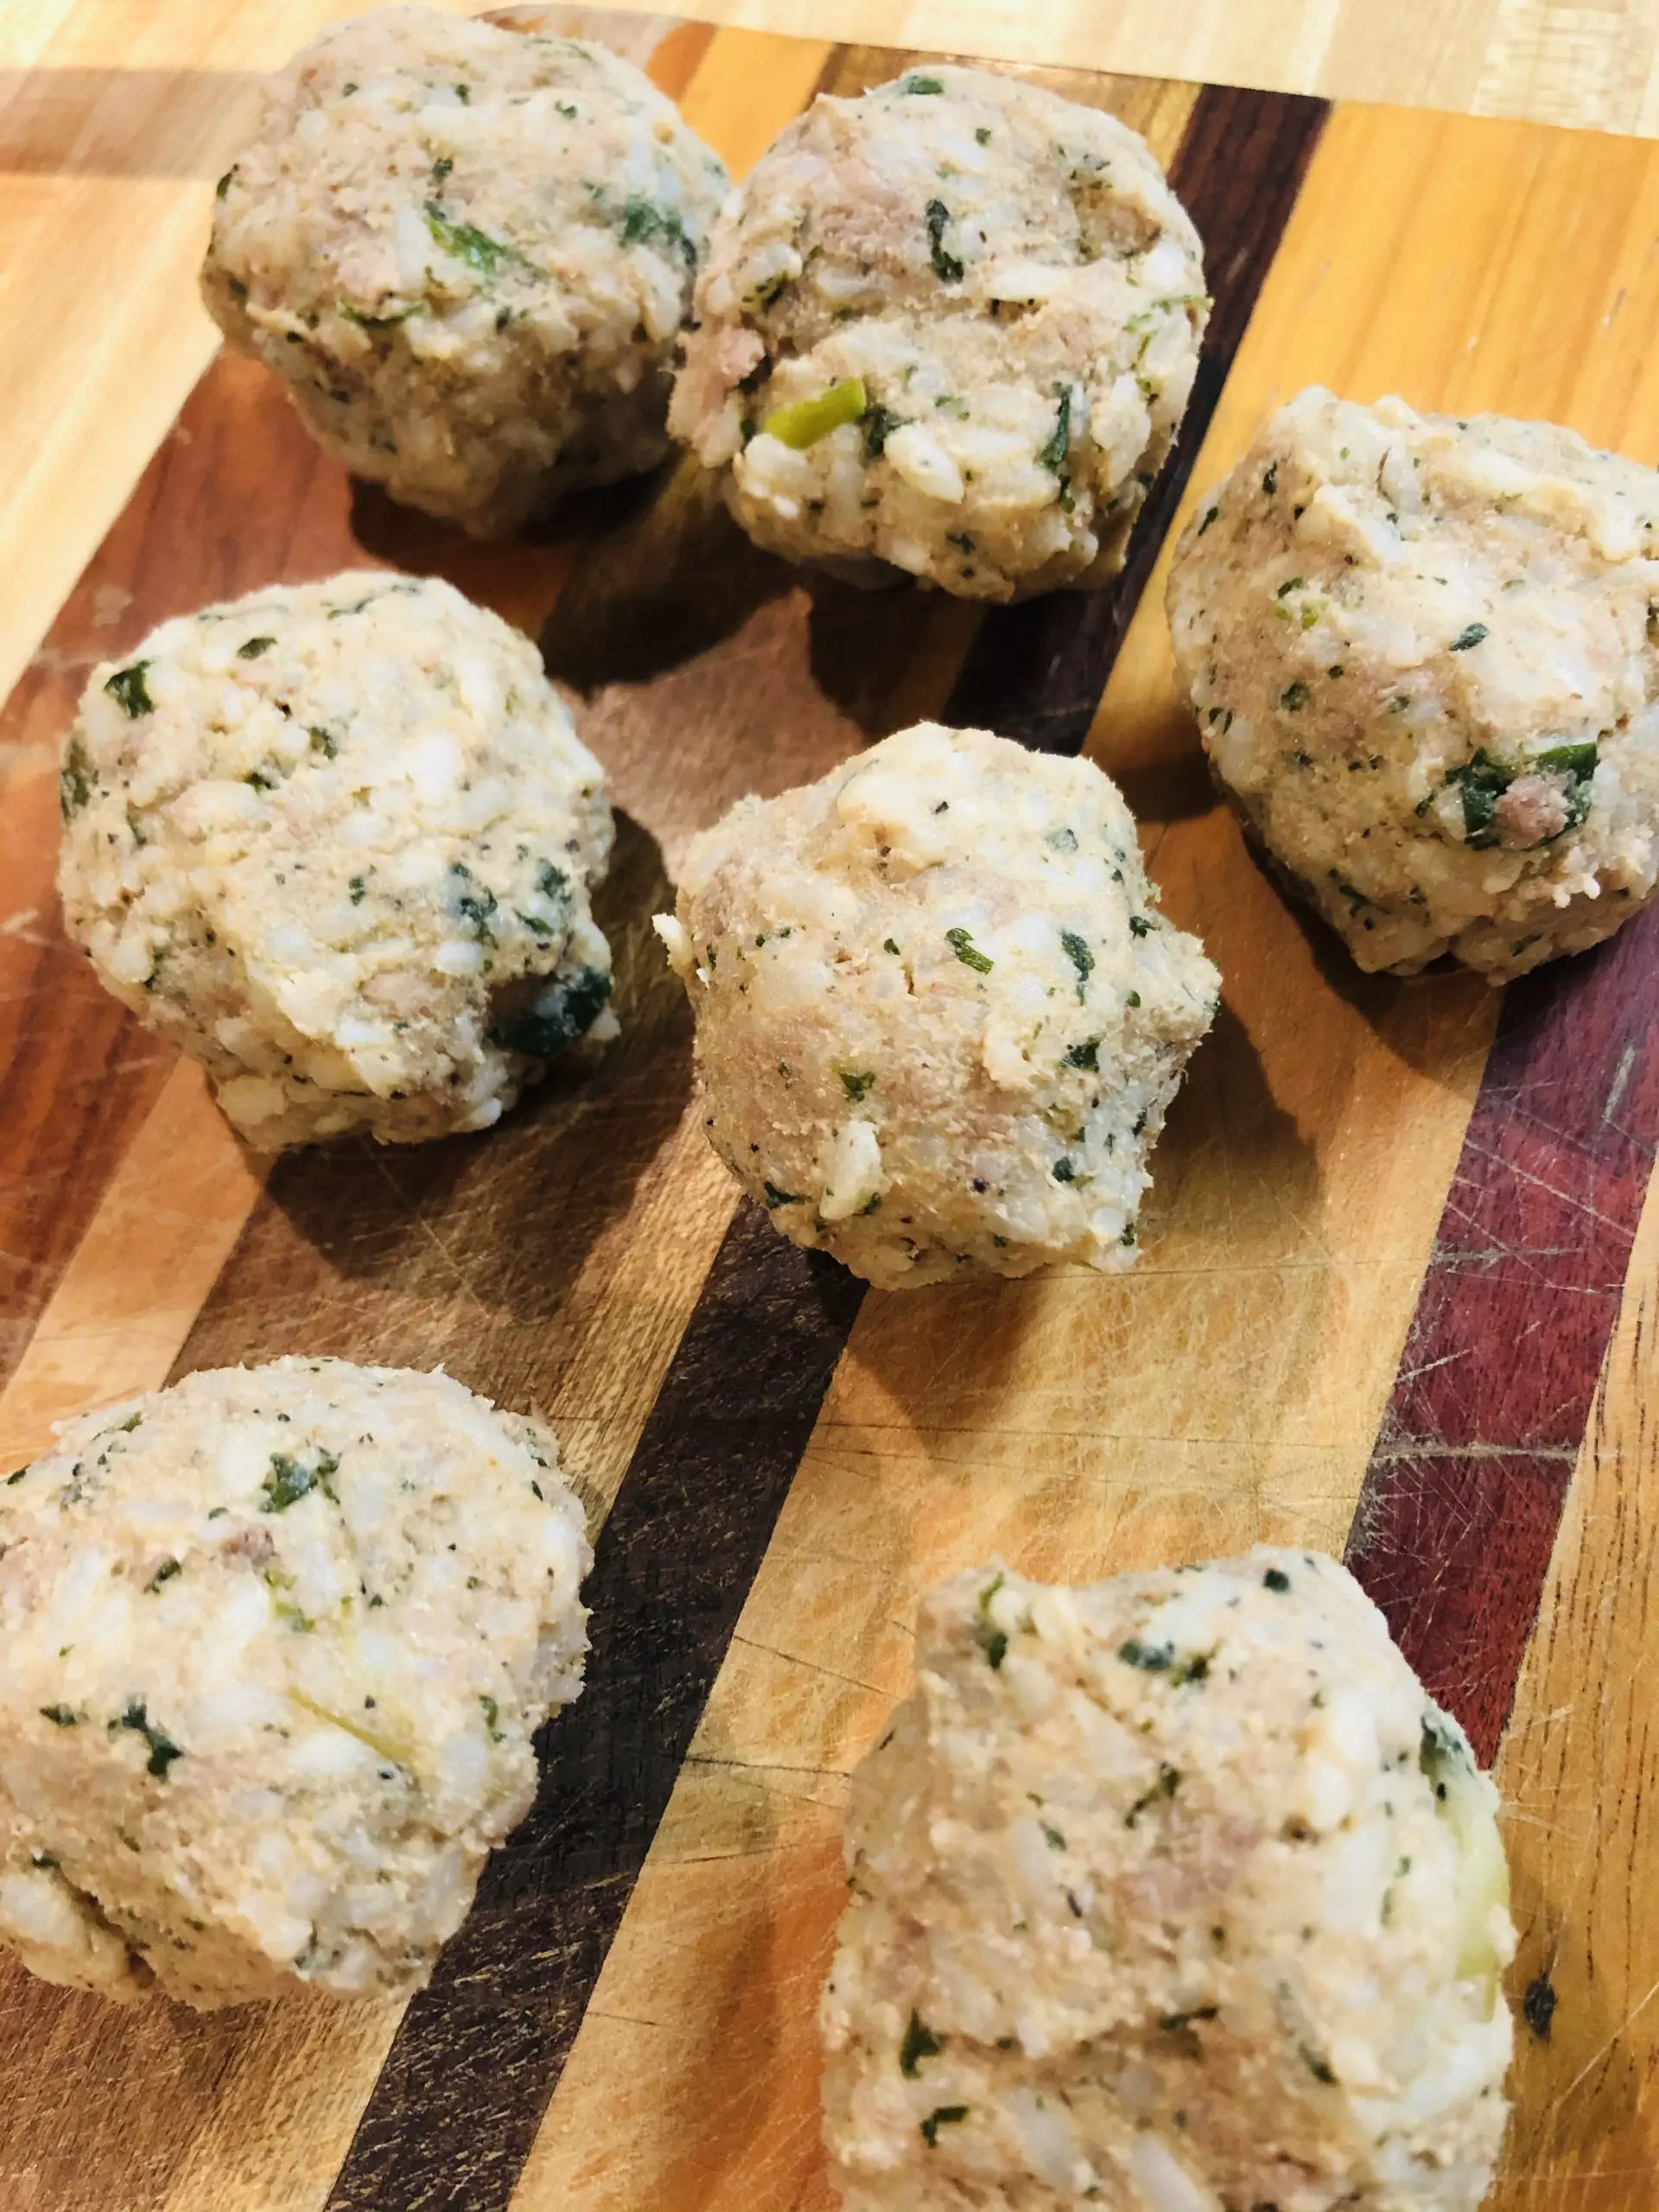 Boudin balls on a wooden board